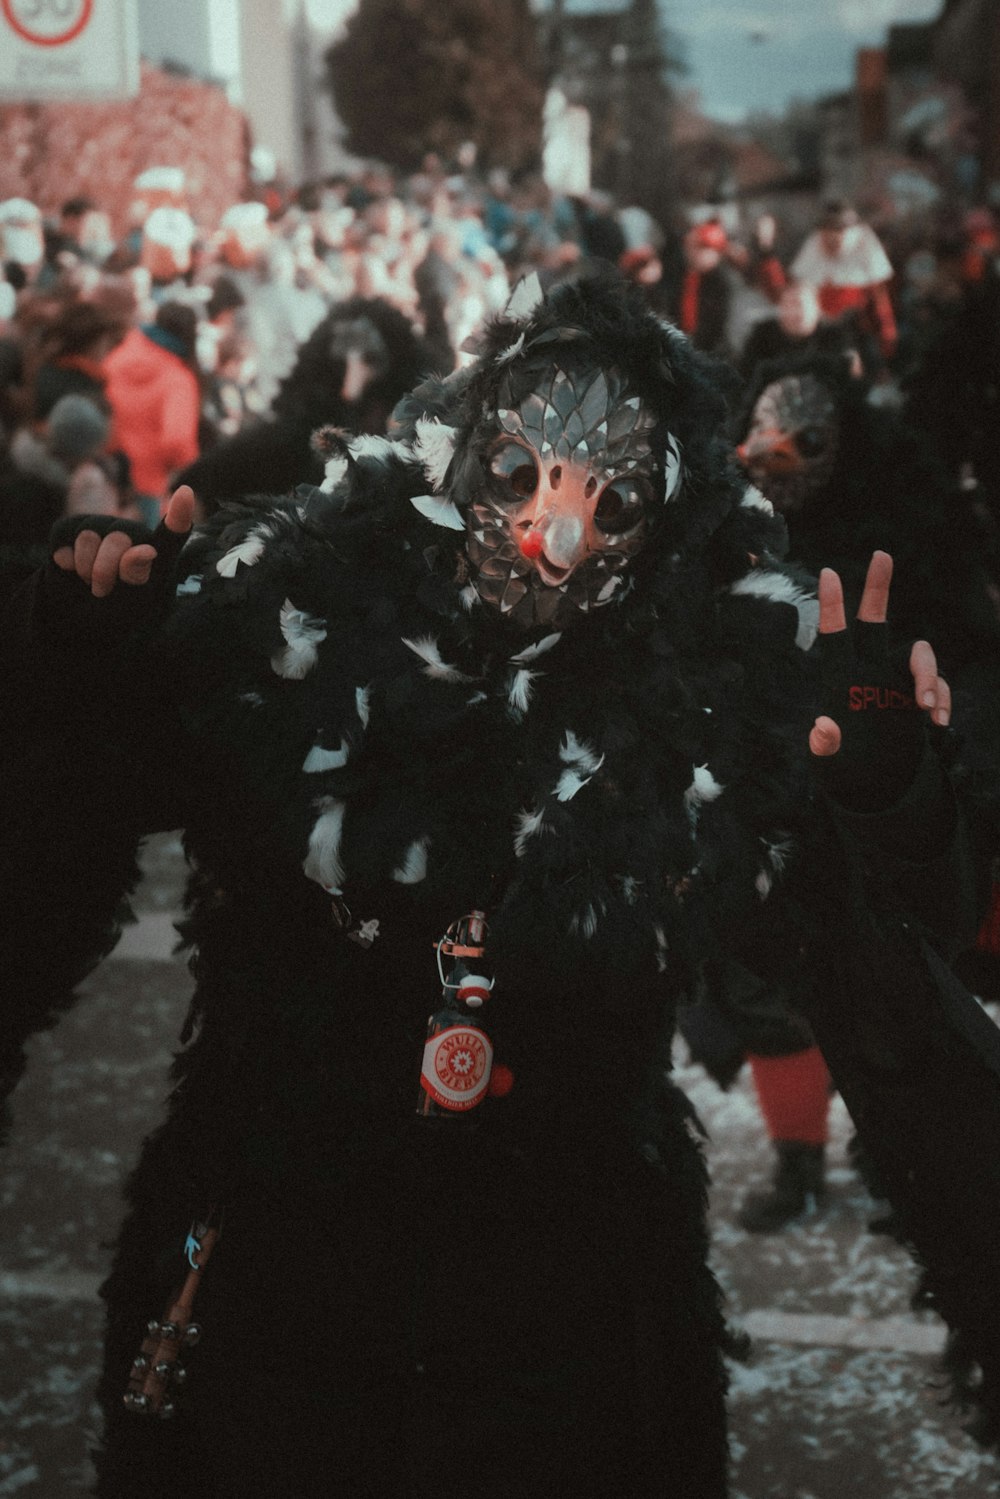 a group of people dressed in costumes and masks